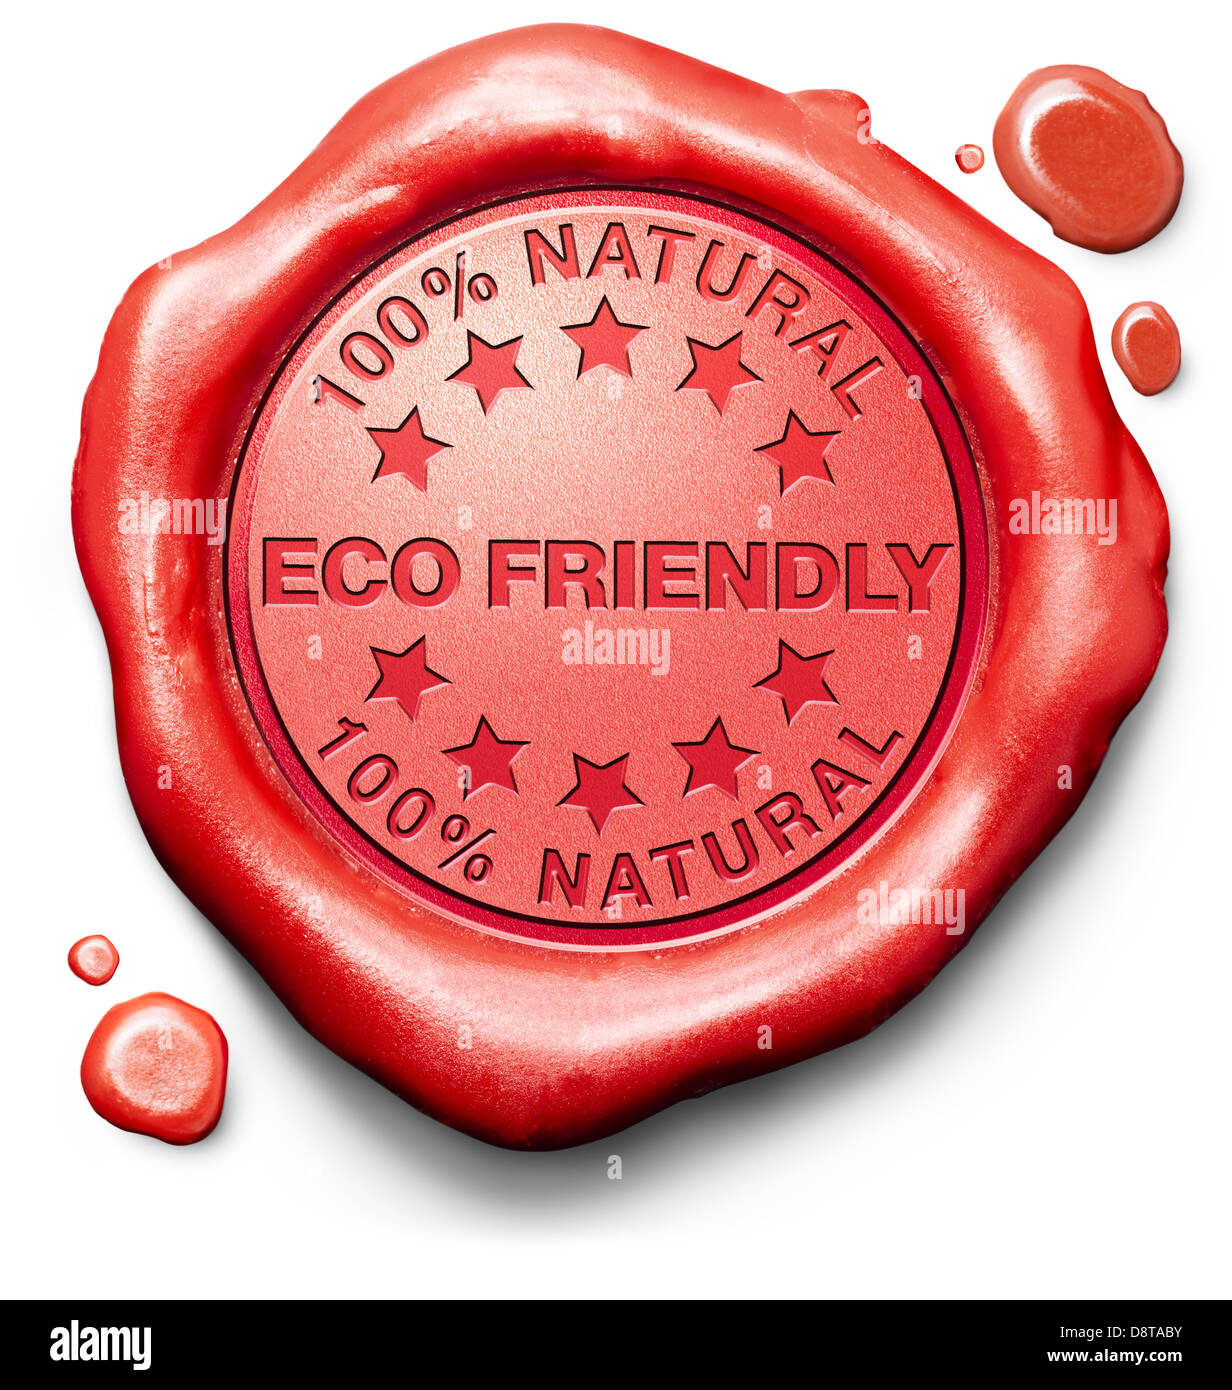 eco friendly 100% natural bio degradable sustainable energy ecological red stamp label or icon Stock Photo